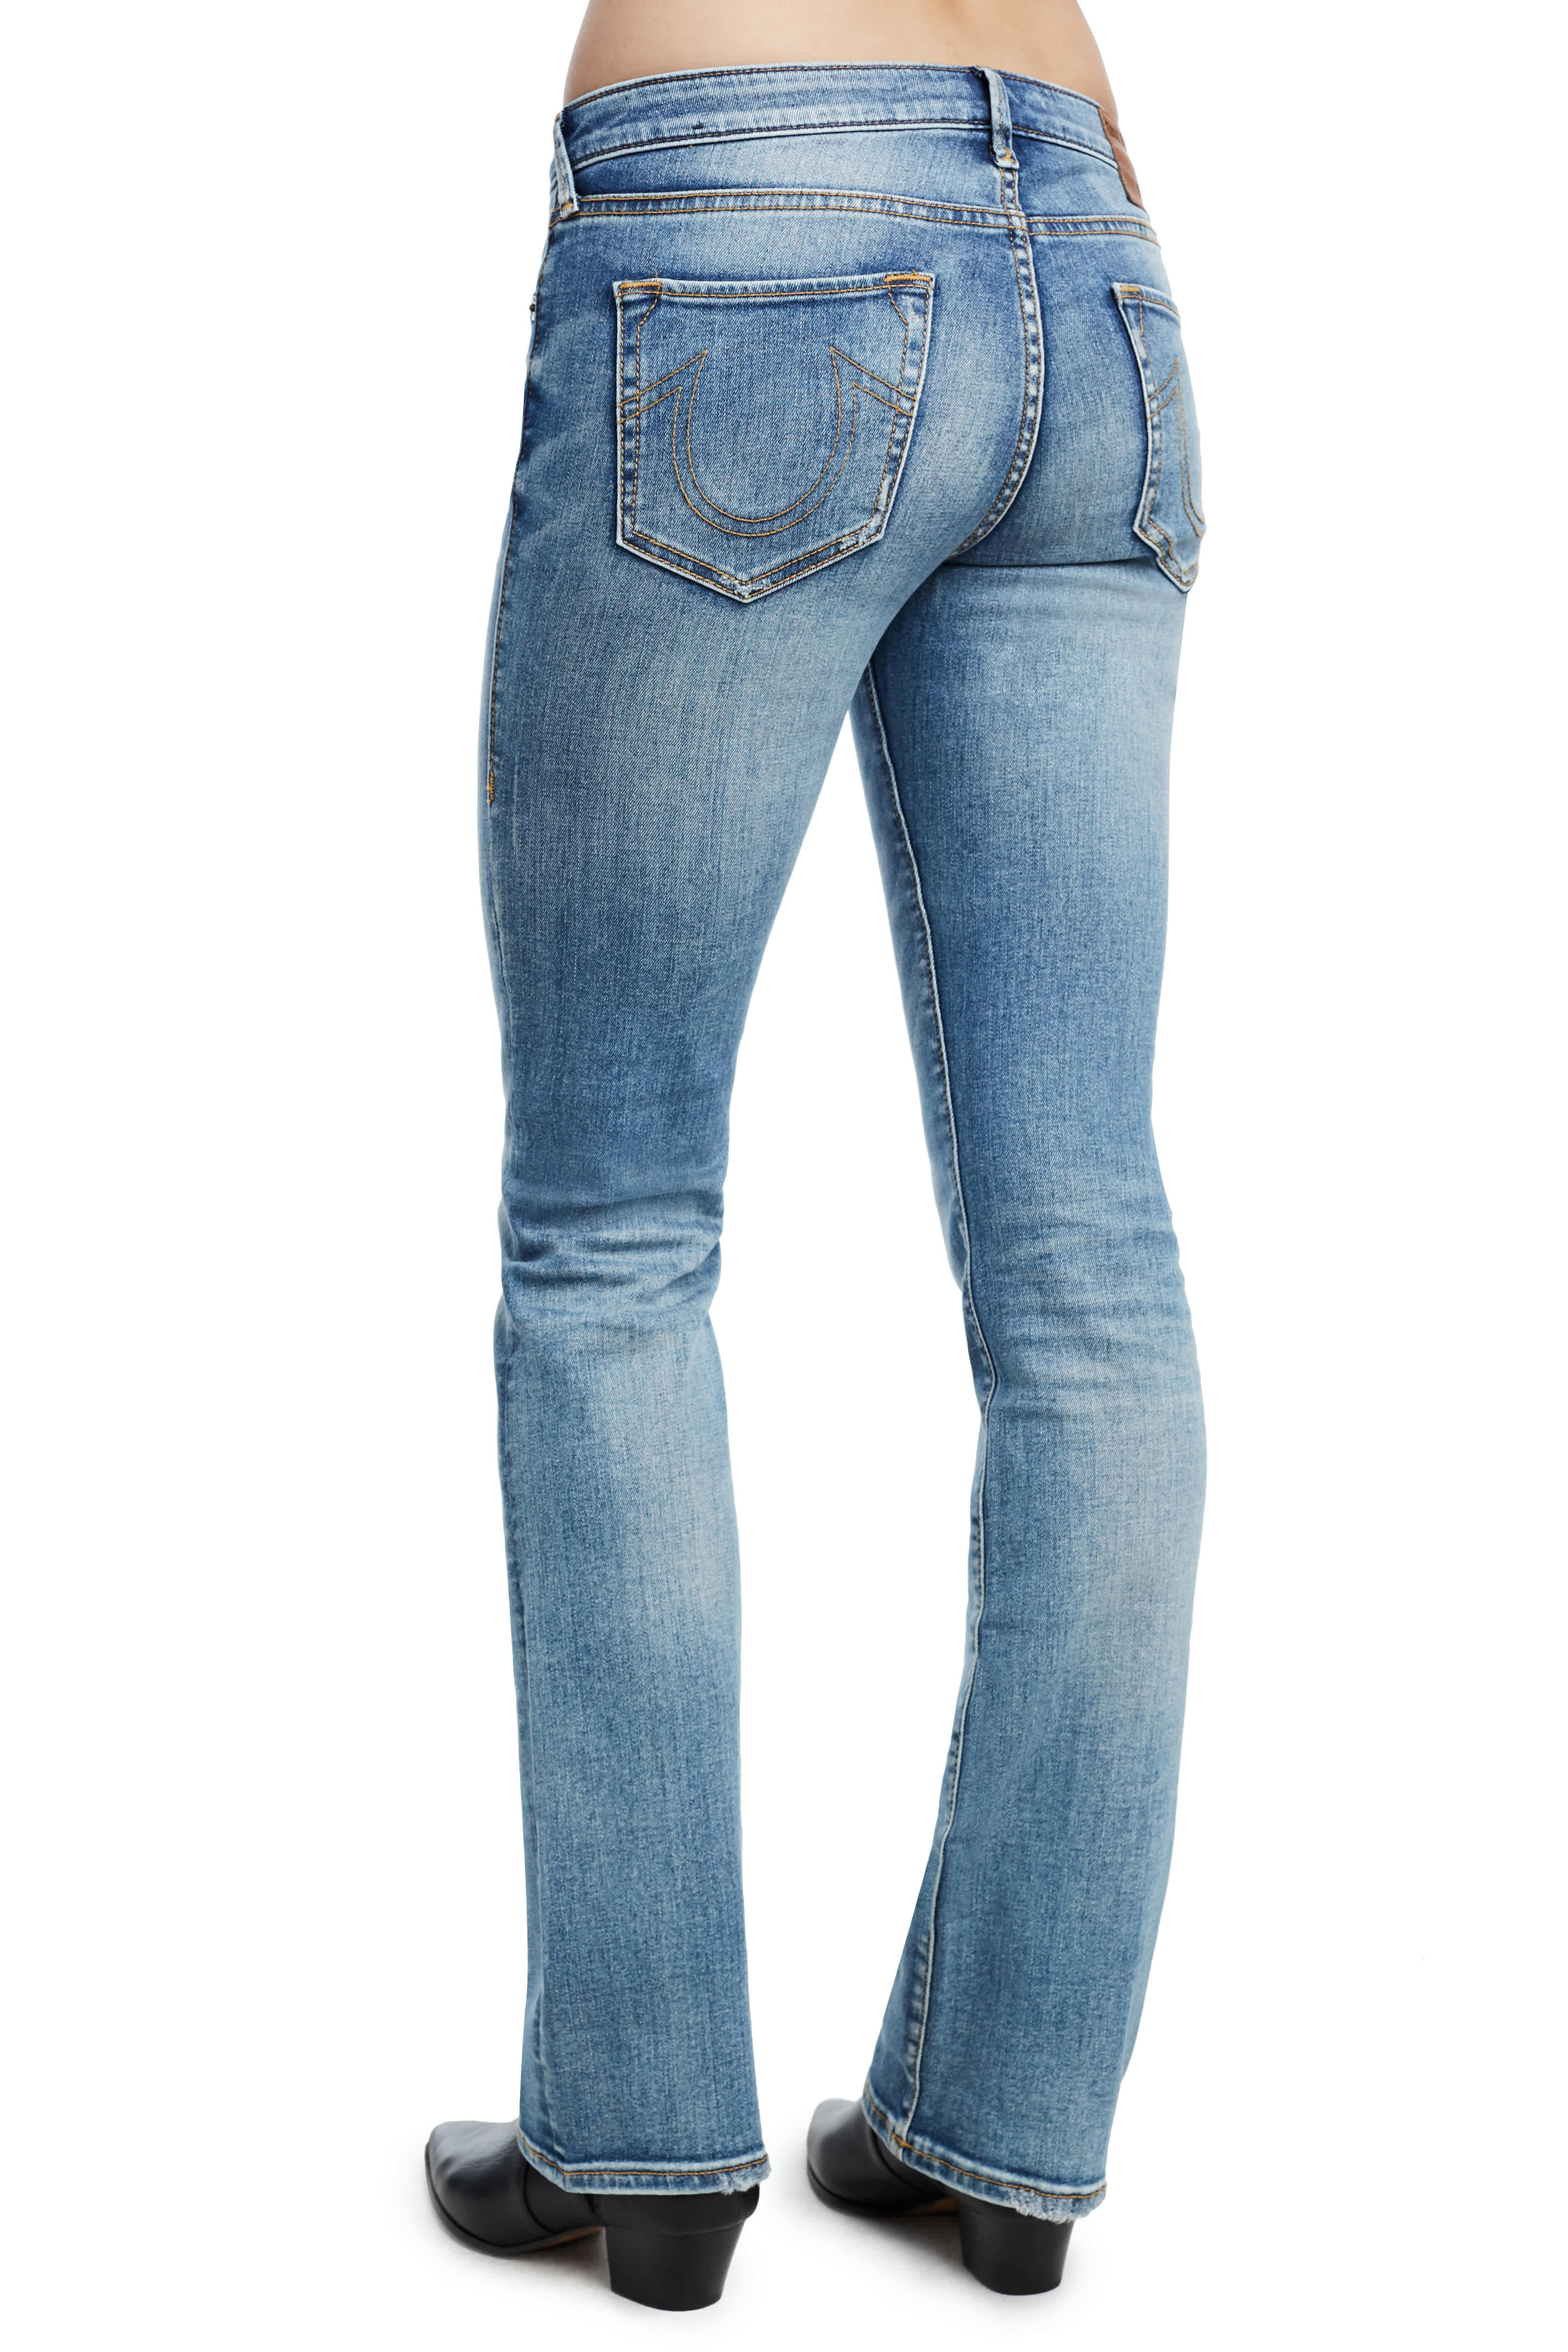 BECCA EXPOSED BUTTON BOOTCUT WOMENS JEAN